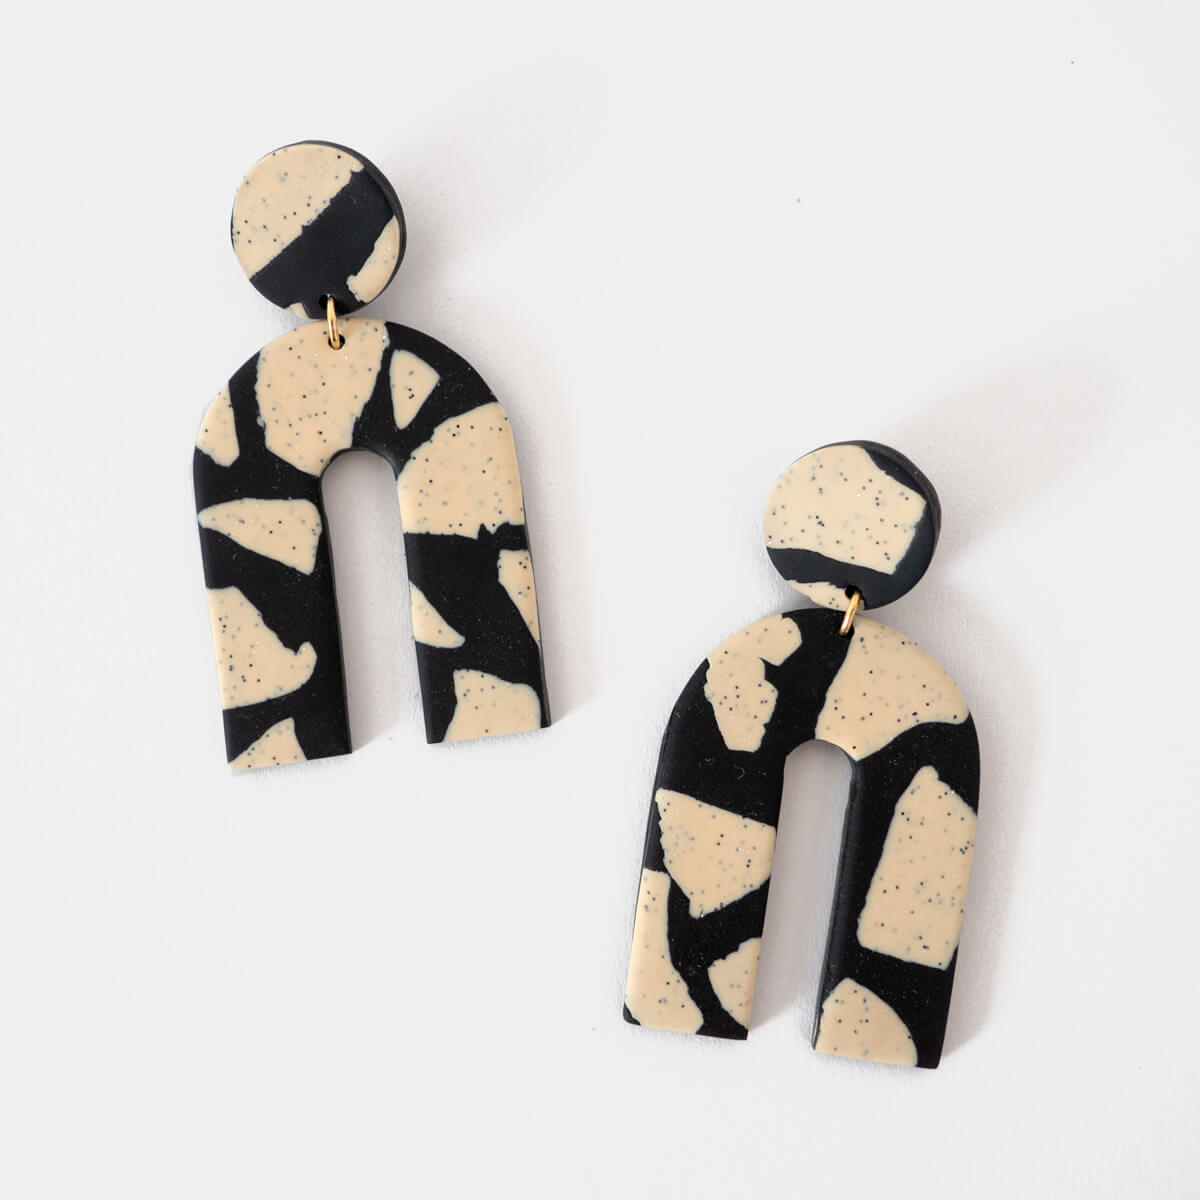 Large Terrazzo Arch Earrings in Black and beige by Fison Zair for Curious Makers